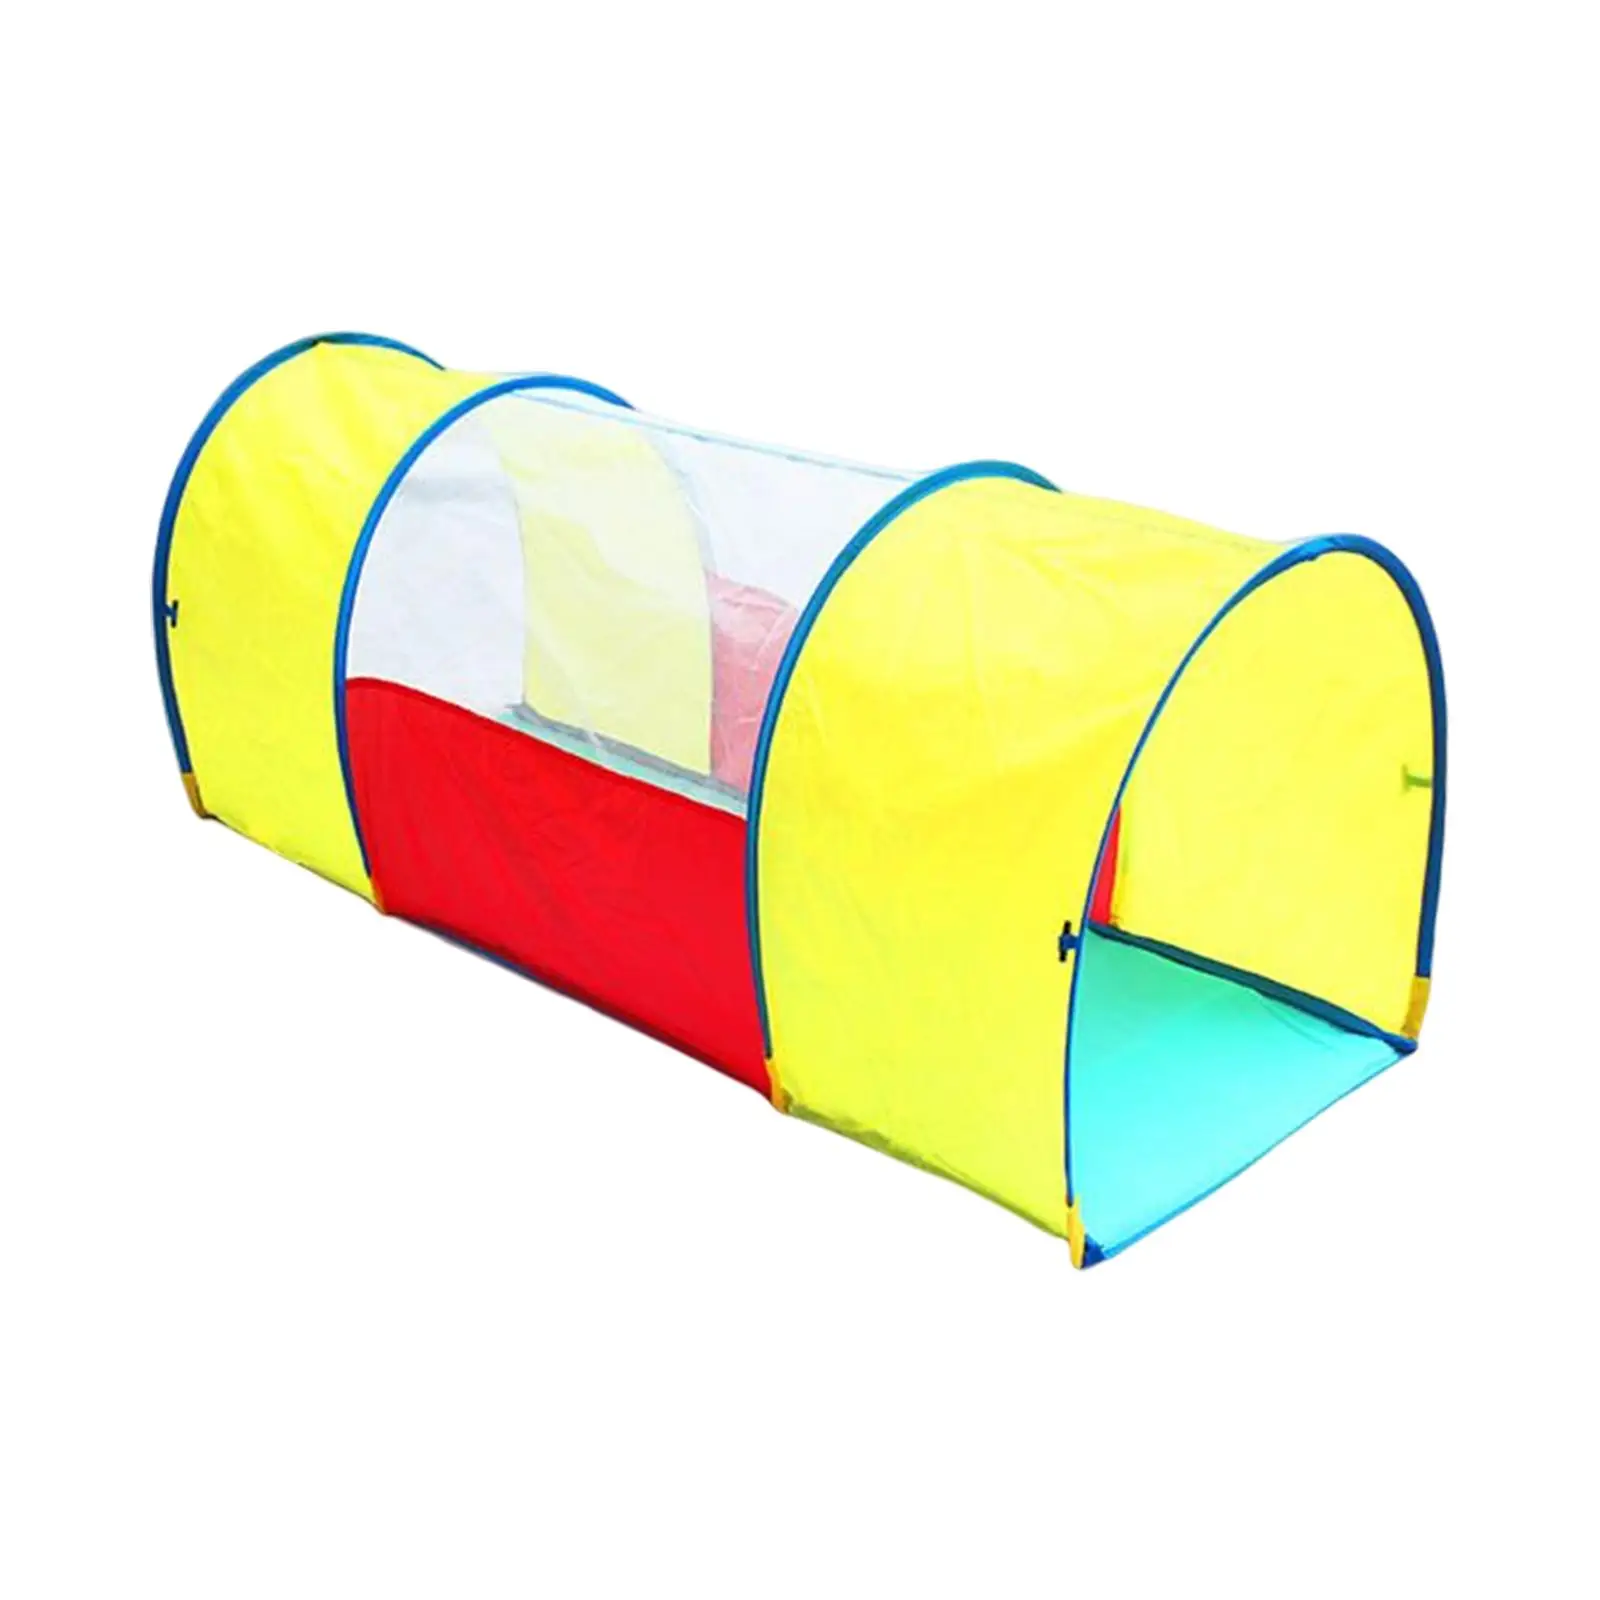 Kids Play Tunnel Tent Indoor Outdoor Toy Colorful Crawl Tunnel Toy for Boys